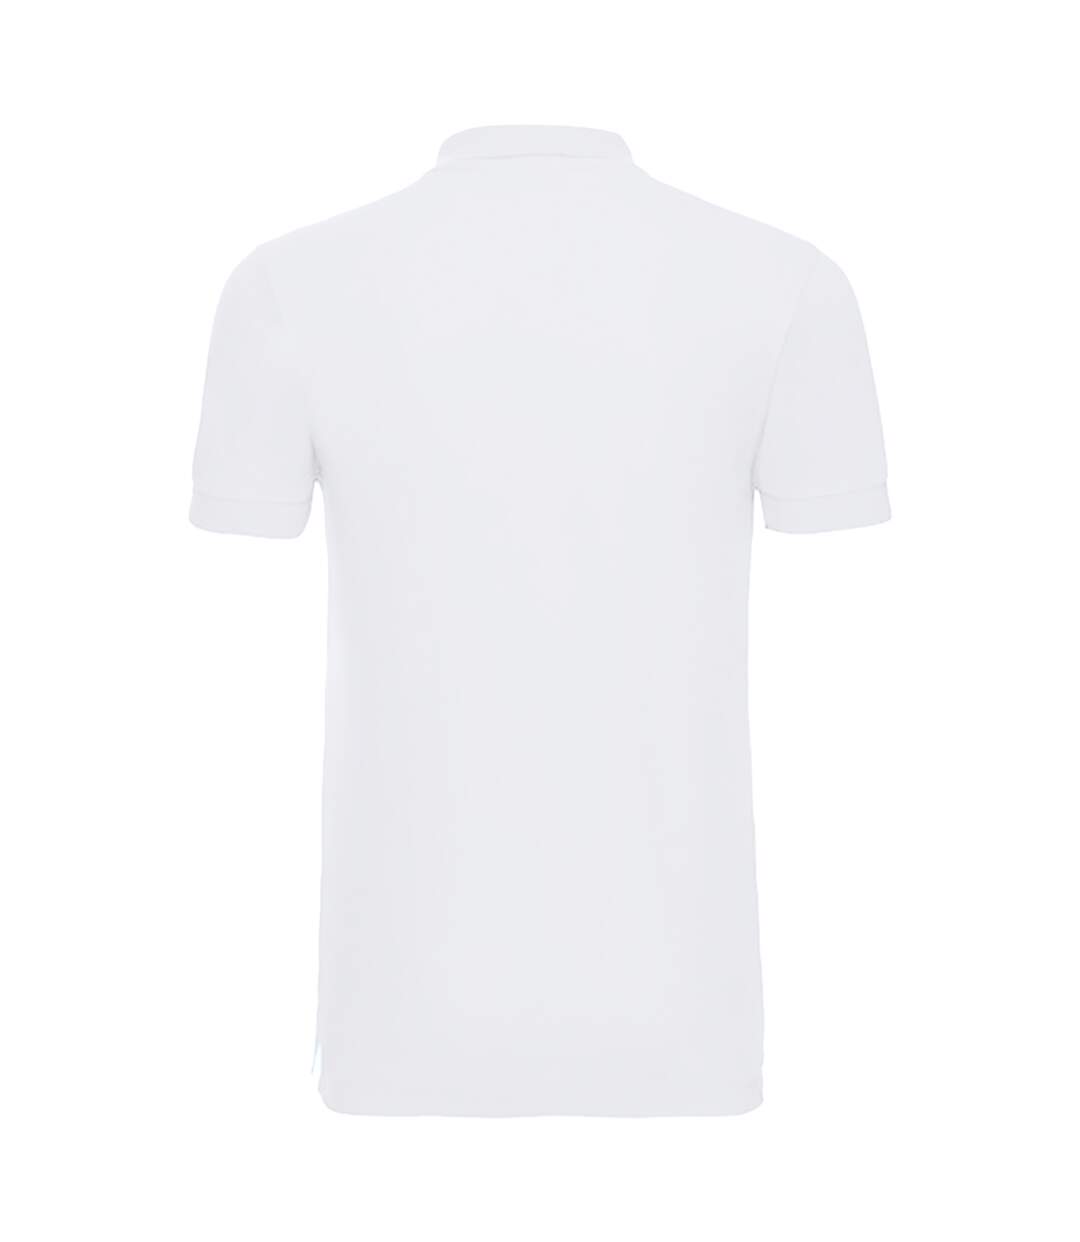 Russell - Polo manches courtes - Homme (Blanc) - UTBC3257